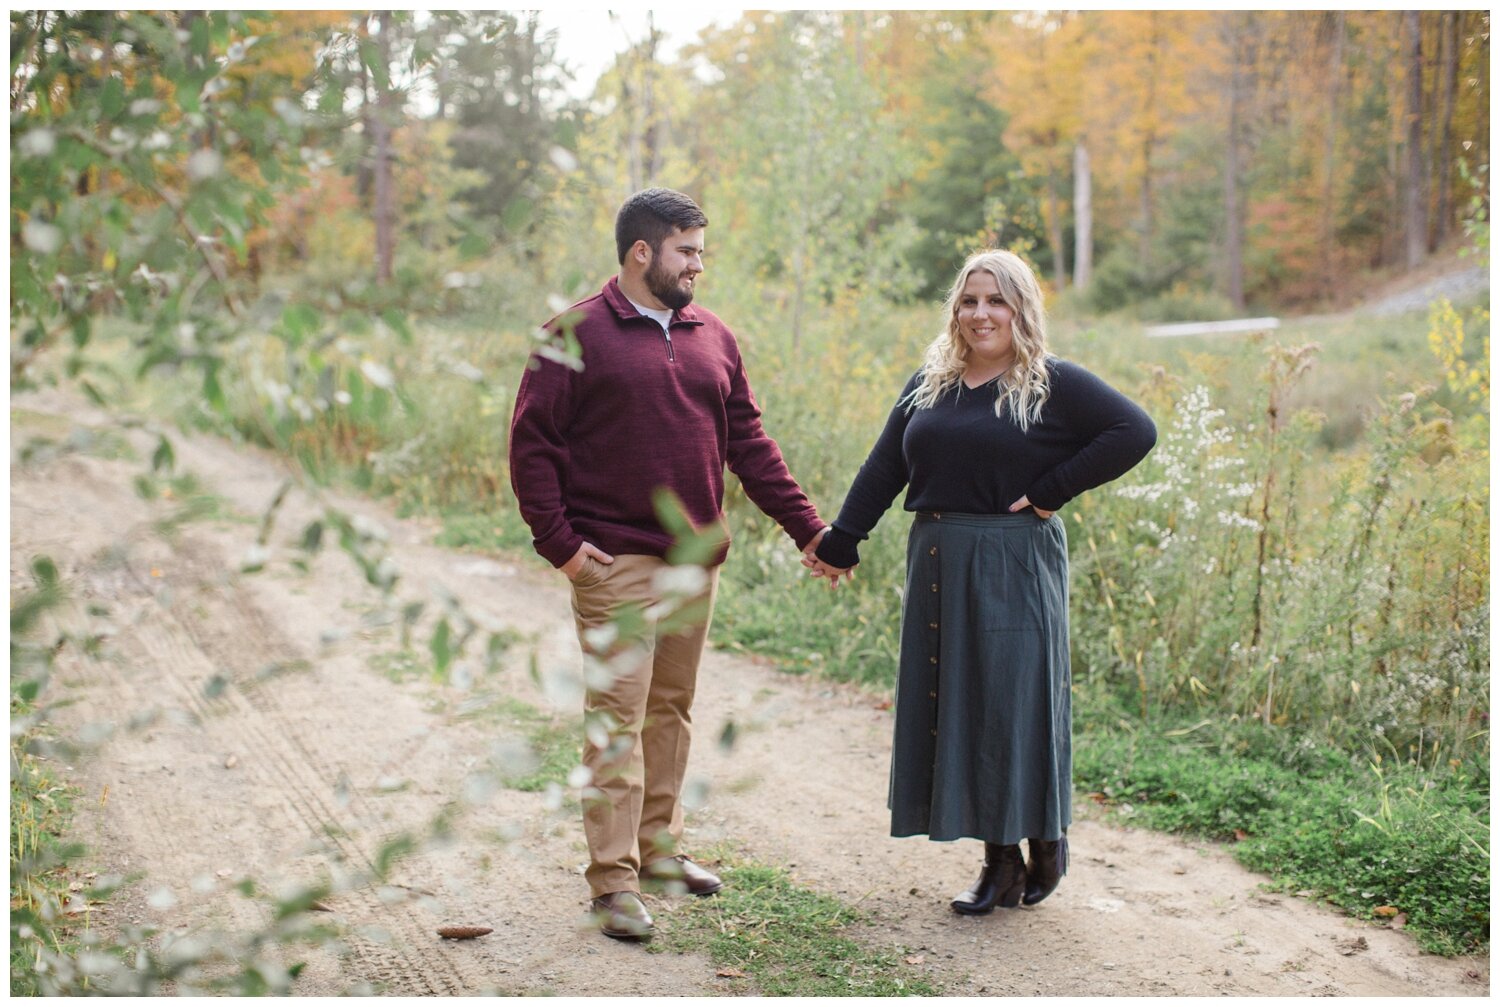 Clarks Summit PA Fall Engagement Session_0044.jpg